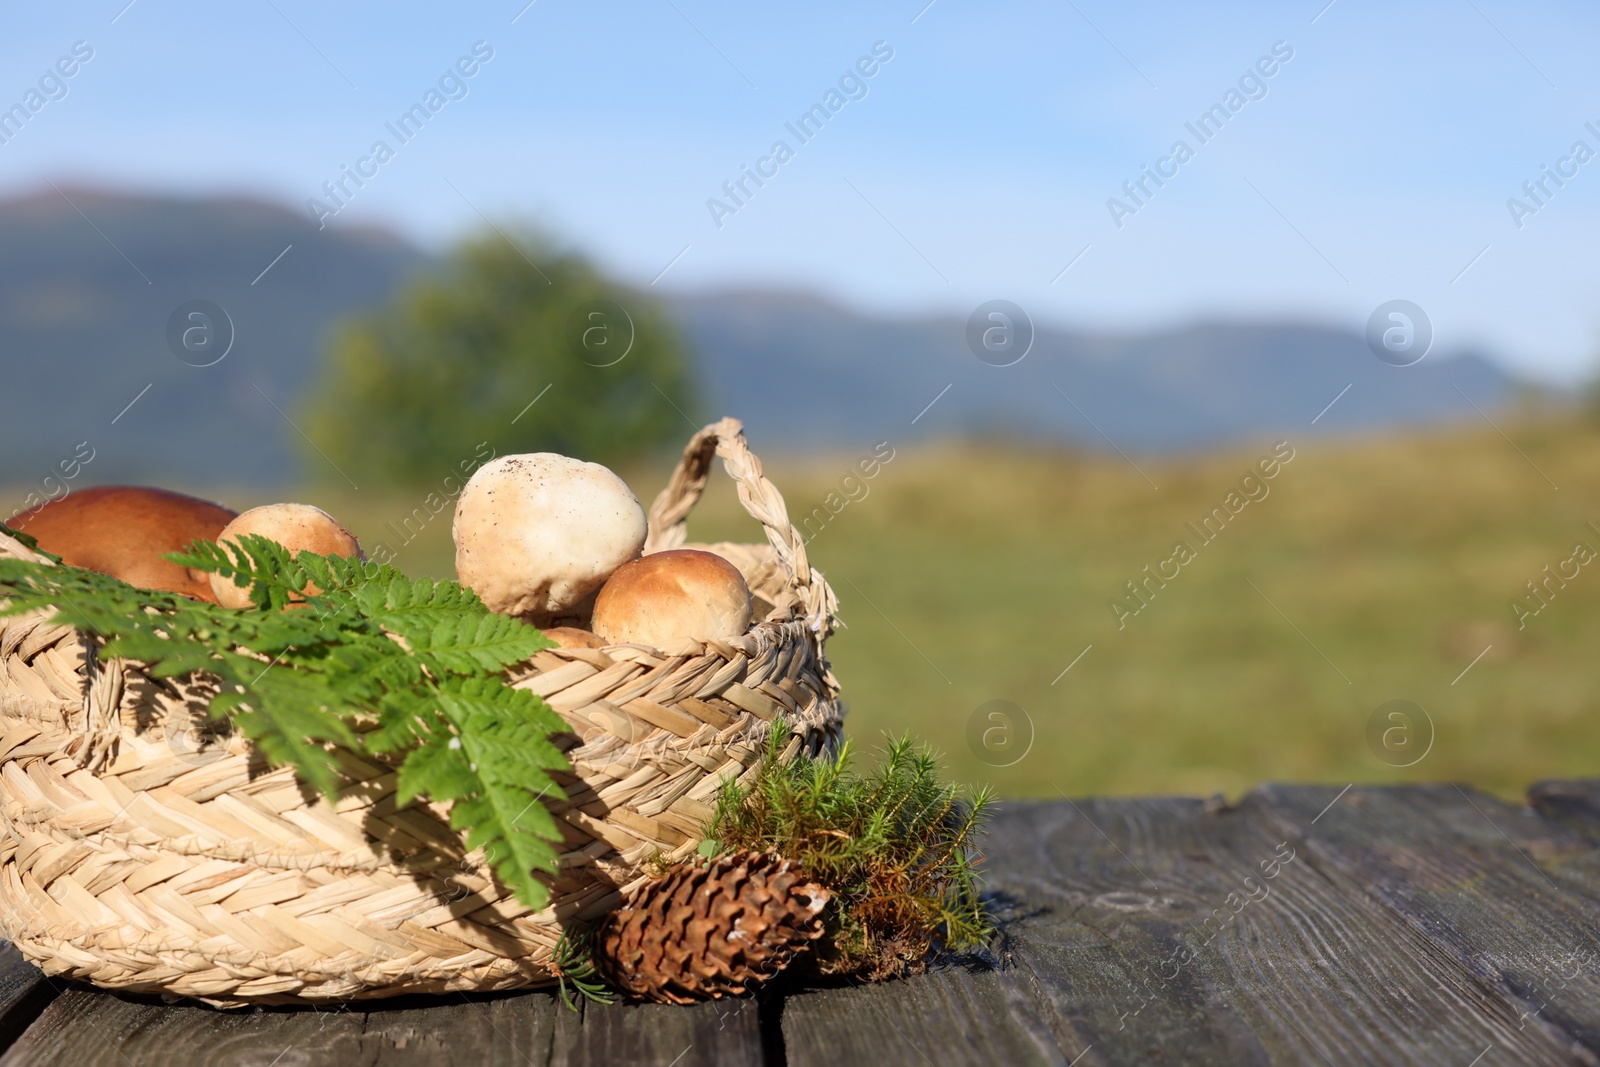 Photo of Basket with mushrooms, fern leaves, cone and moss on wooden table outdoors. Space for text